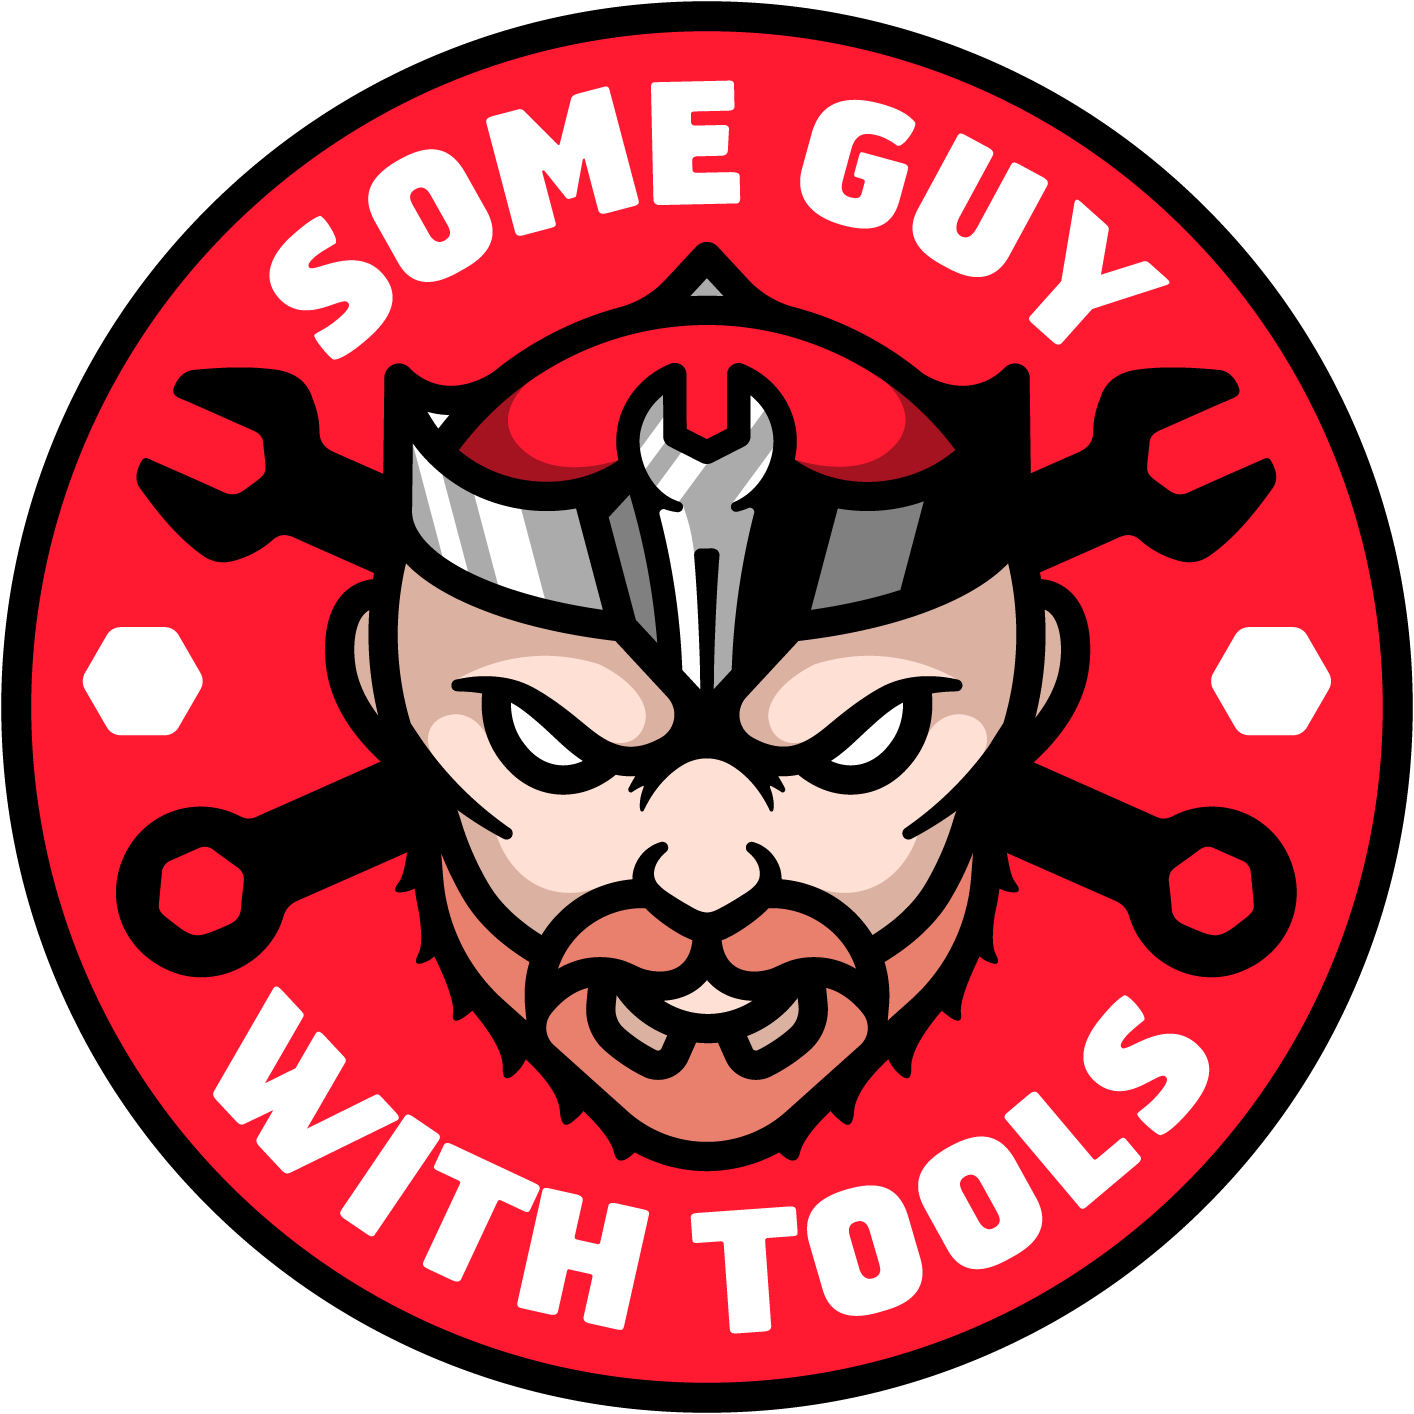 Some Guy with Tools